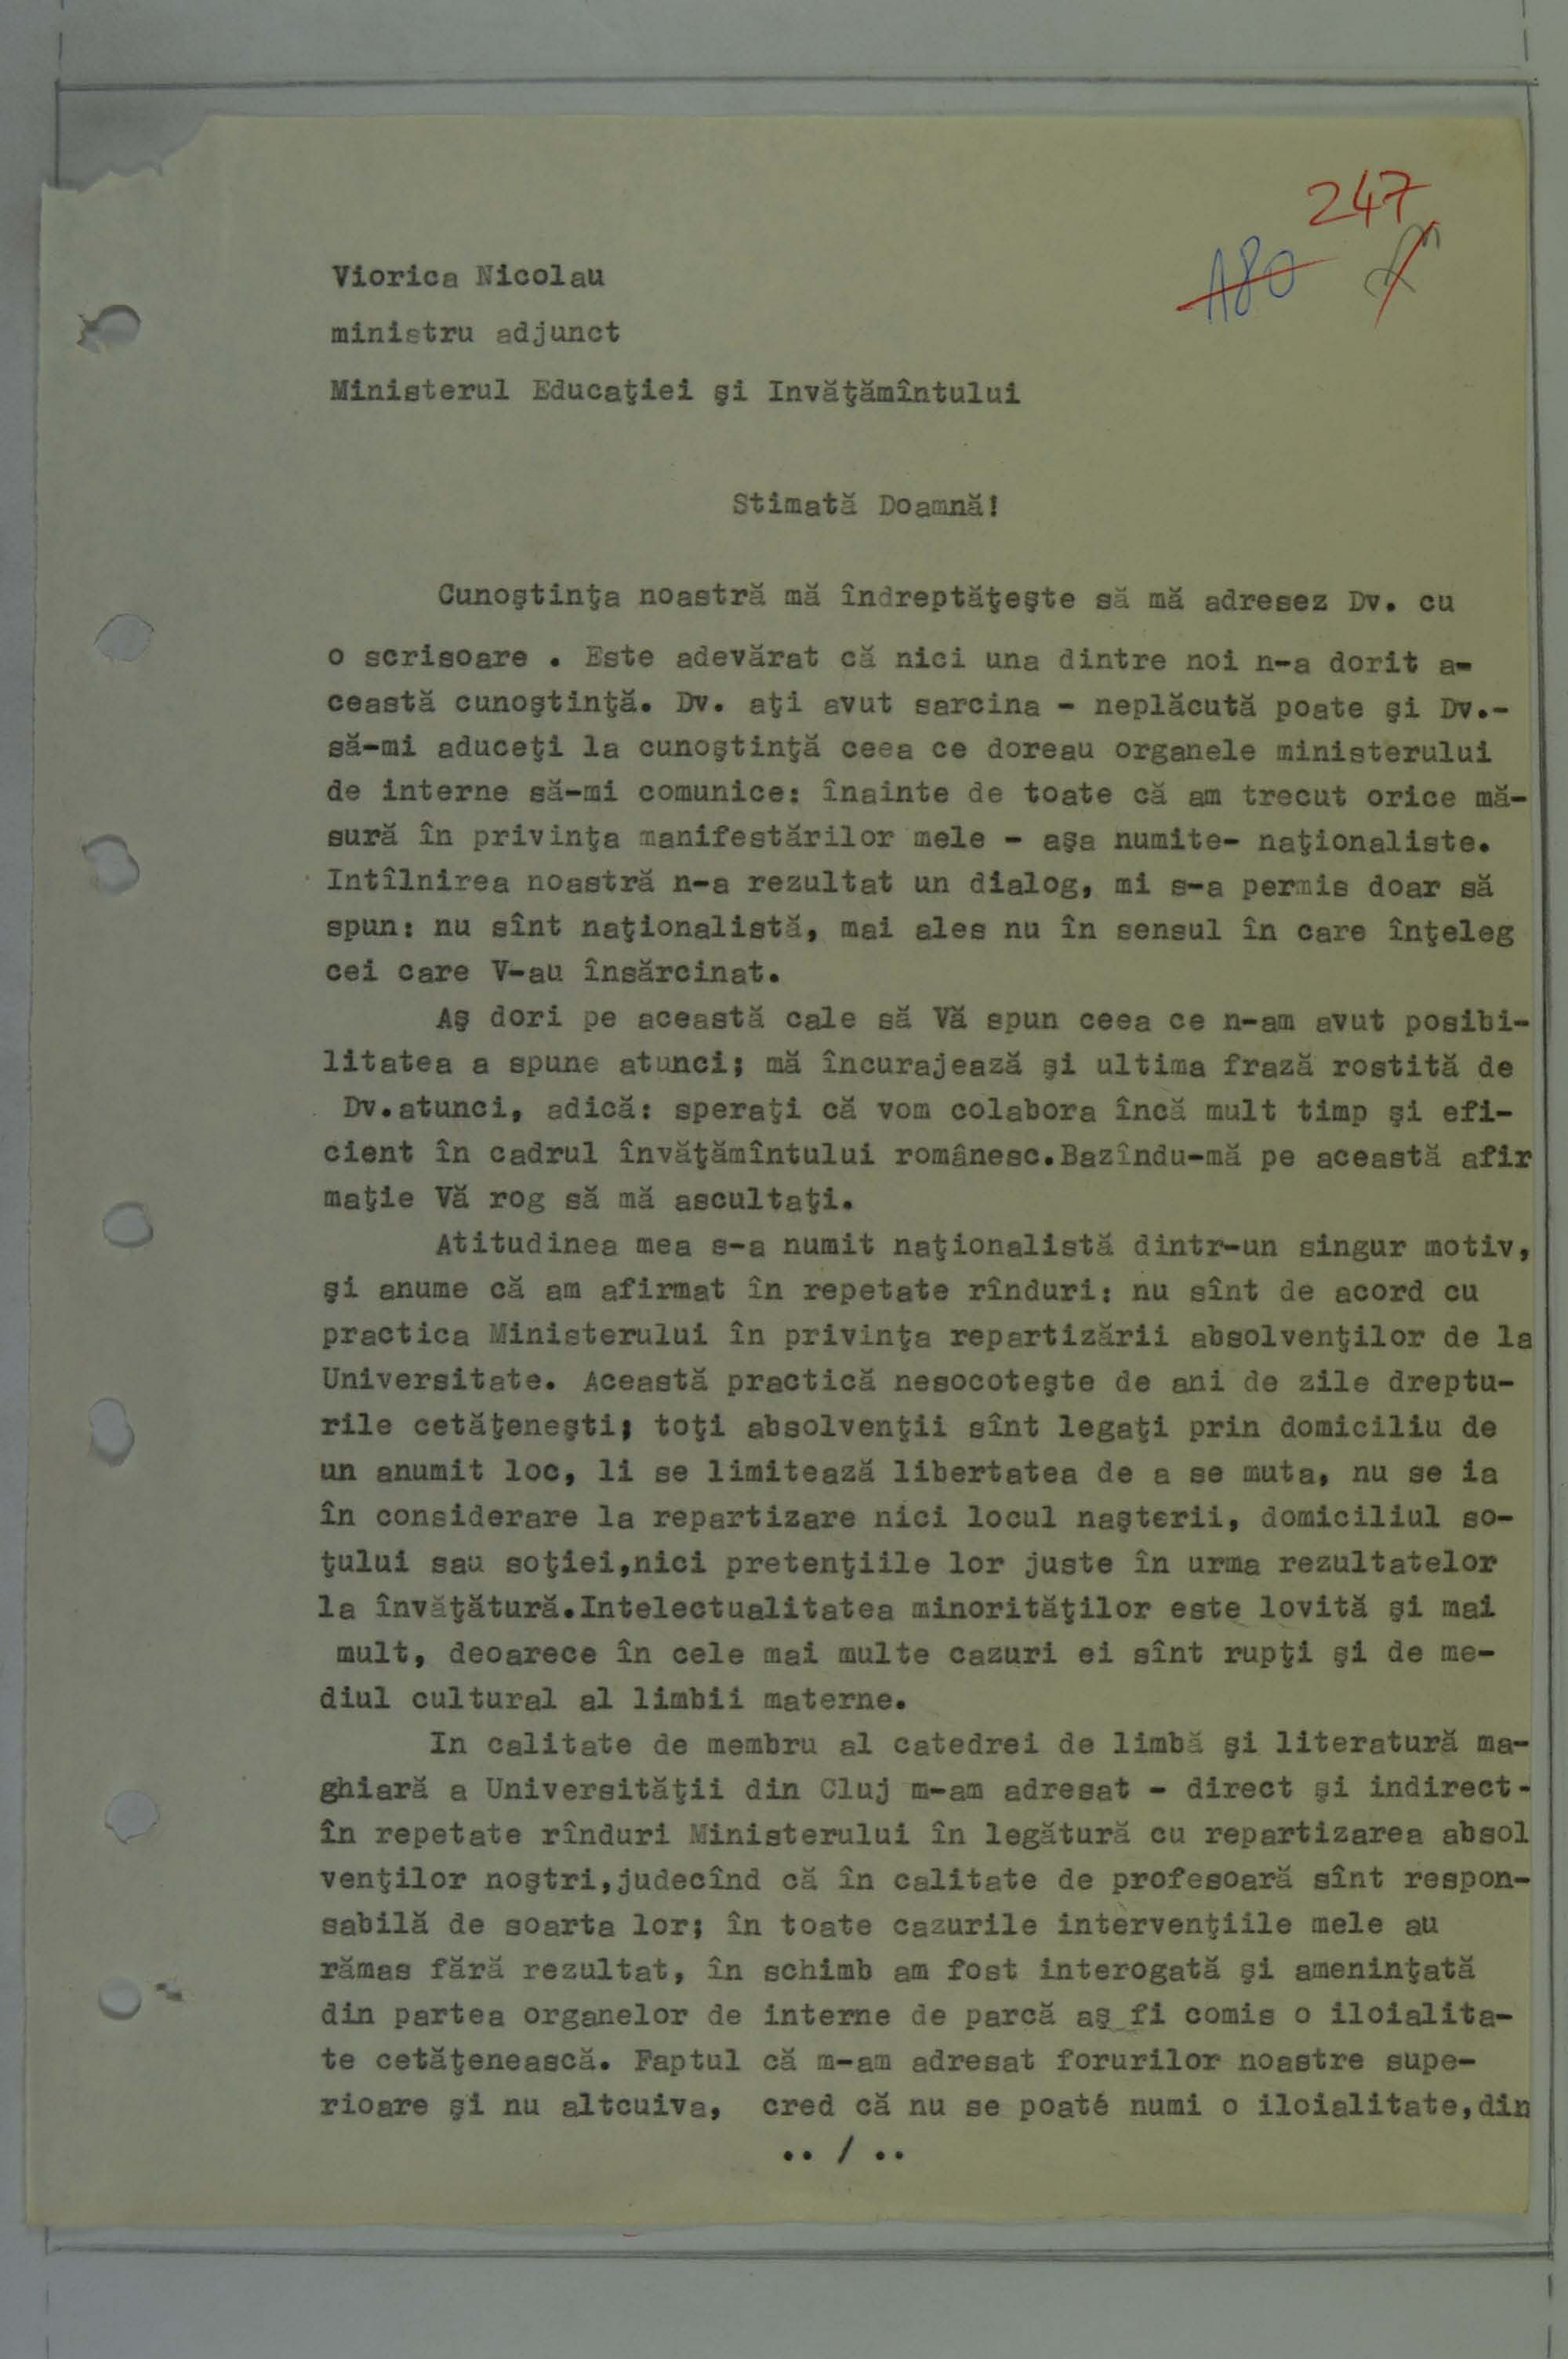 The transcript drafted by the Securitate of the Memorandum sent by Gyimesi to the Ministry of Education in 1988